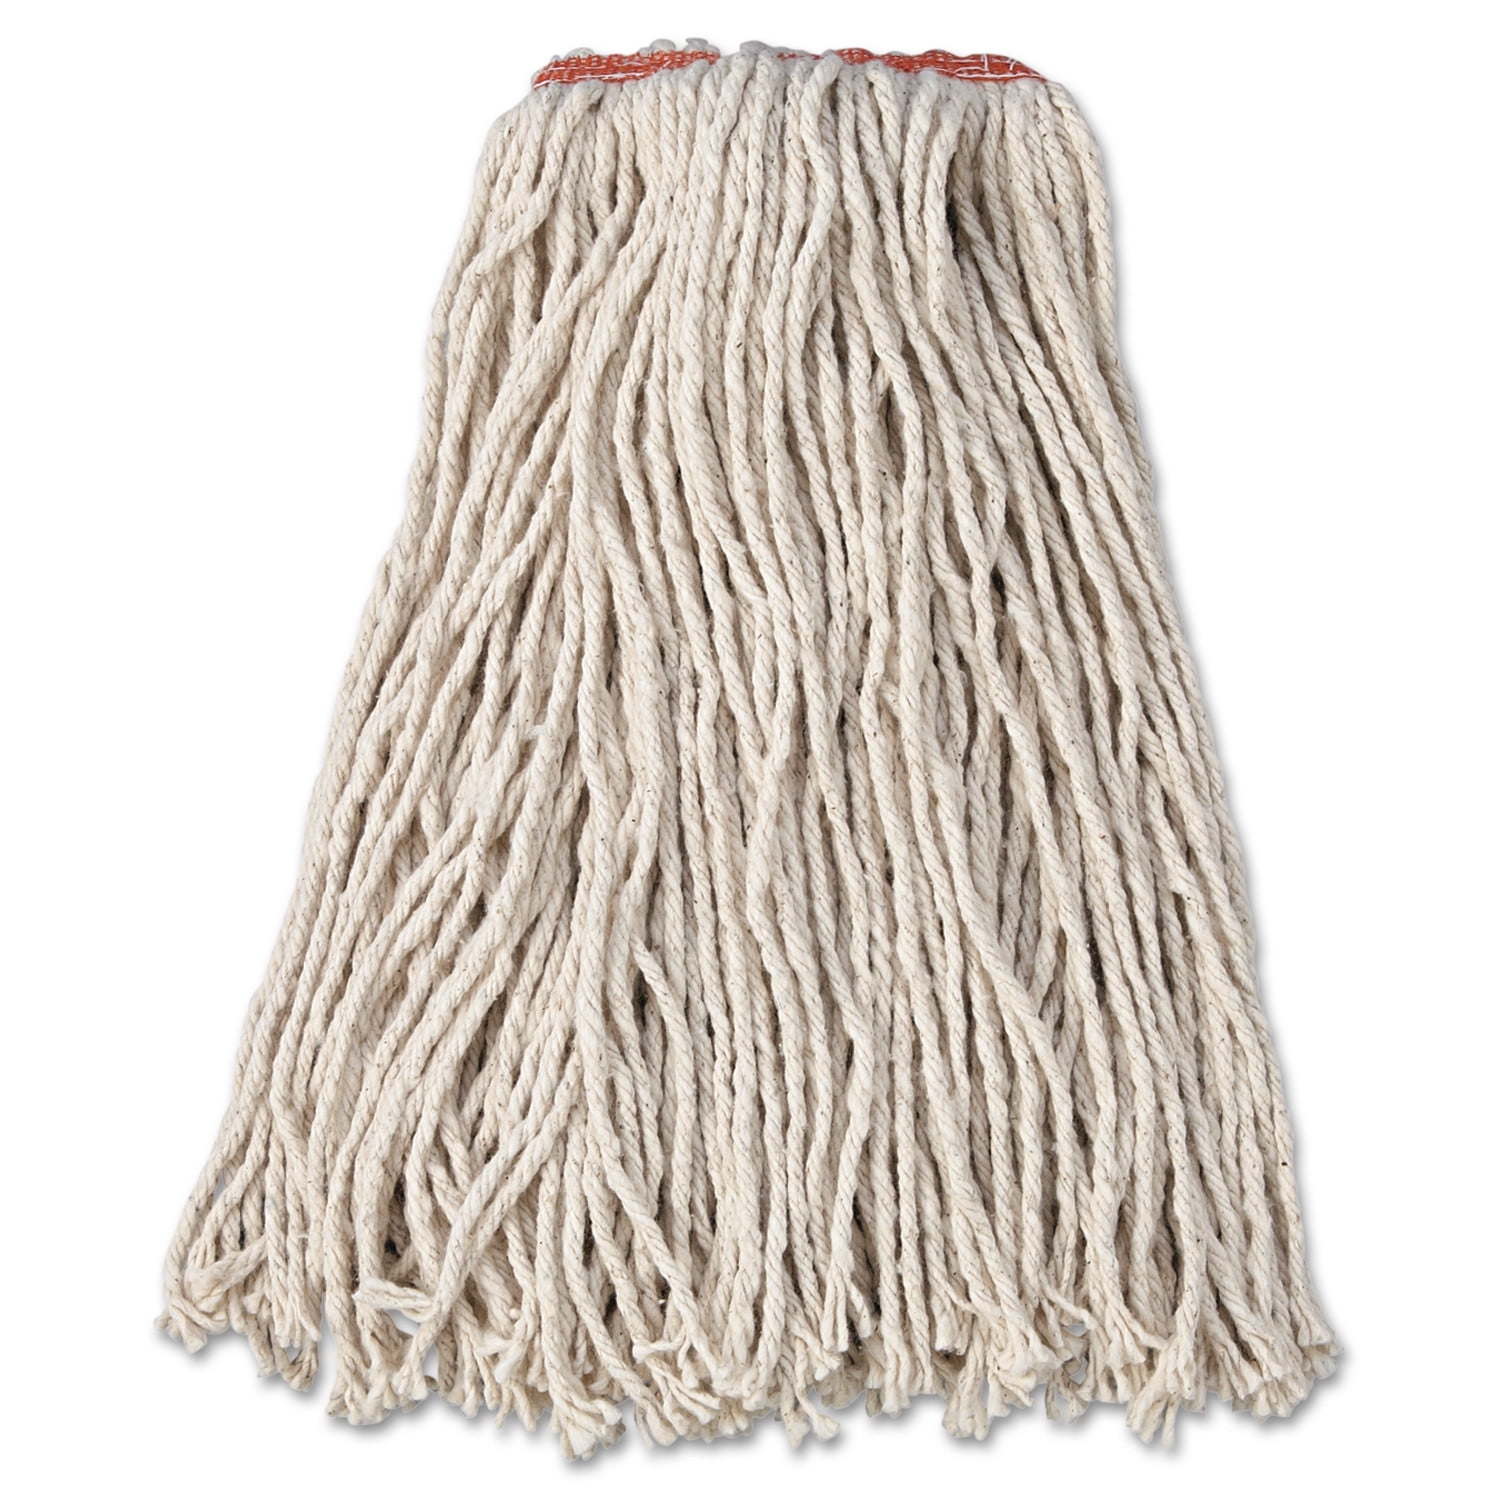 Jumbo Replacement Cushion Head MOP Rayon Poly Threaded Screw on # 14 USA for sale online 